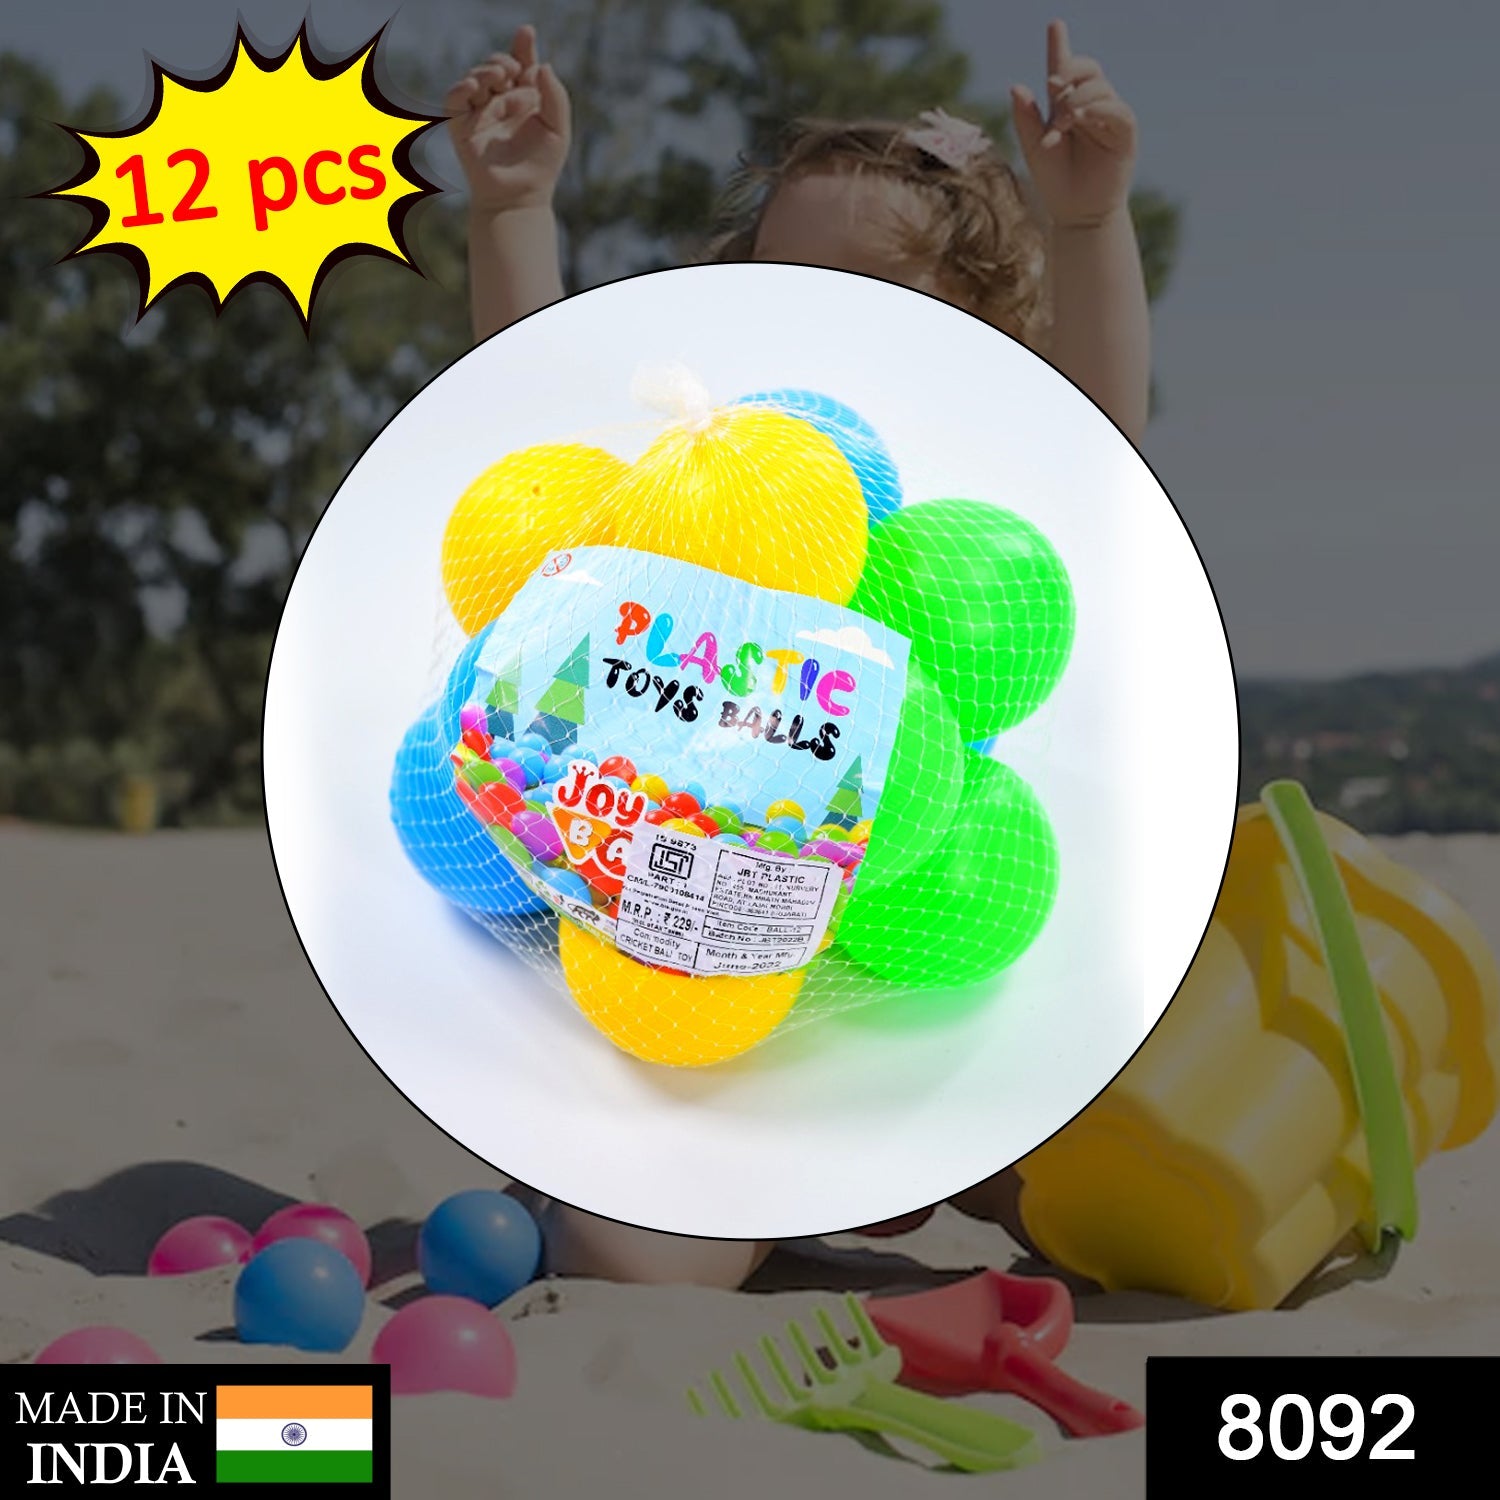 8092 Baby Premium Multicolour Balls for Kids Pool Pit/Ocean Ball Without Sharp Edges Soft Balls for Toddler Play Tents & Tunnels Indoor & Outdoor DeoDap